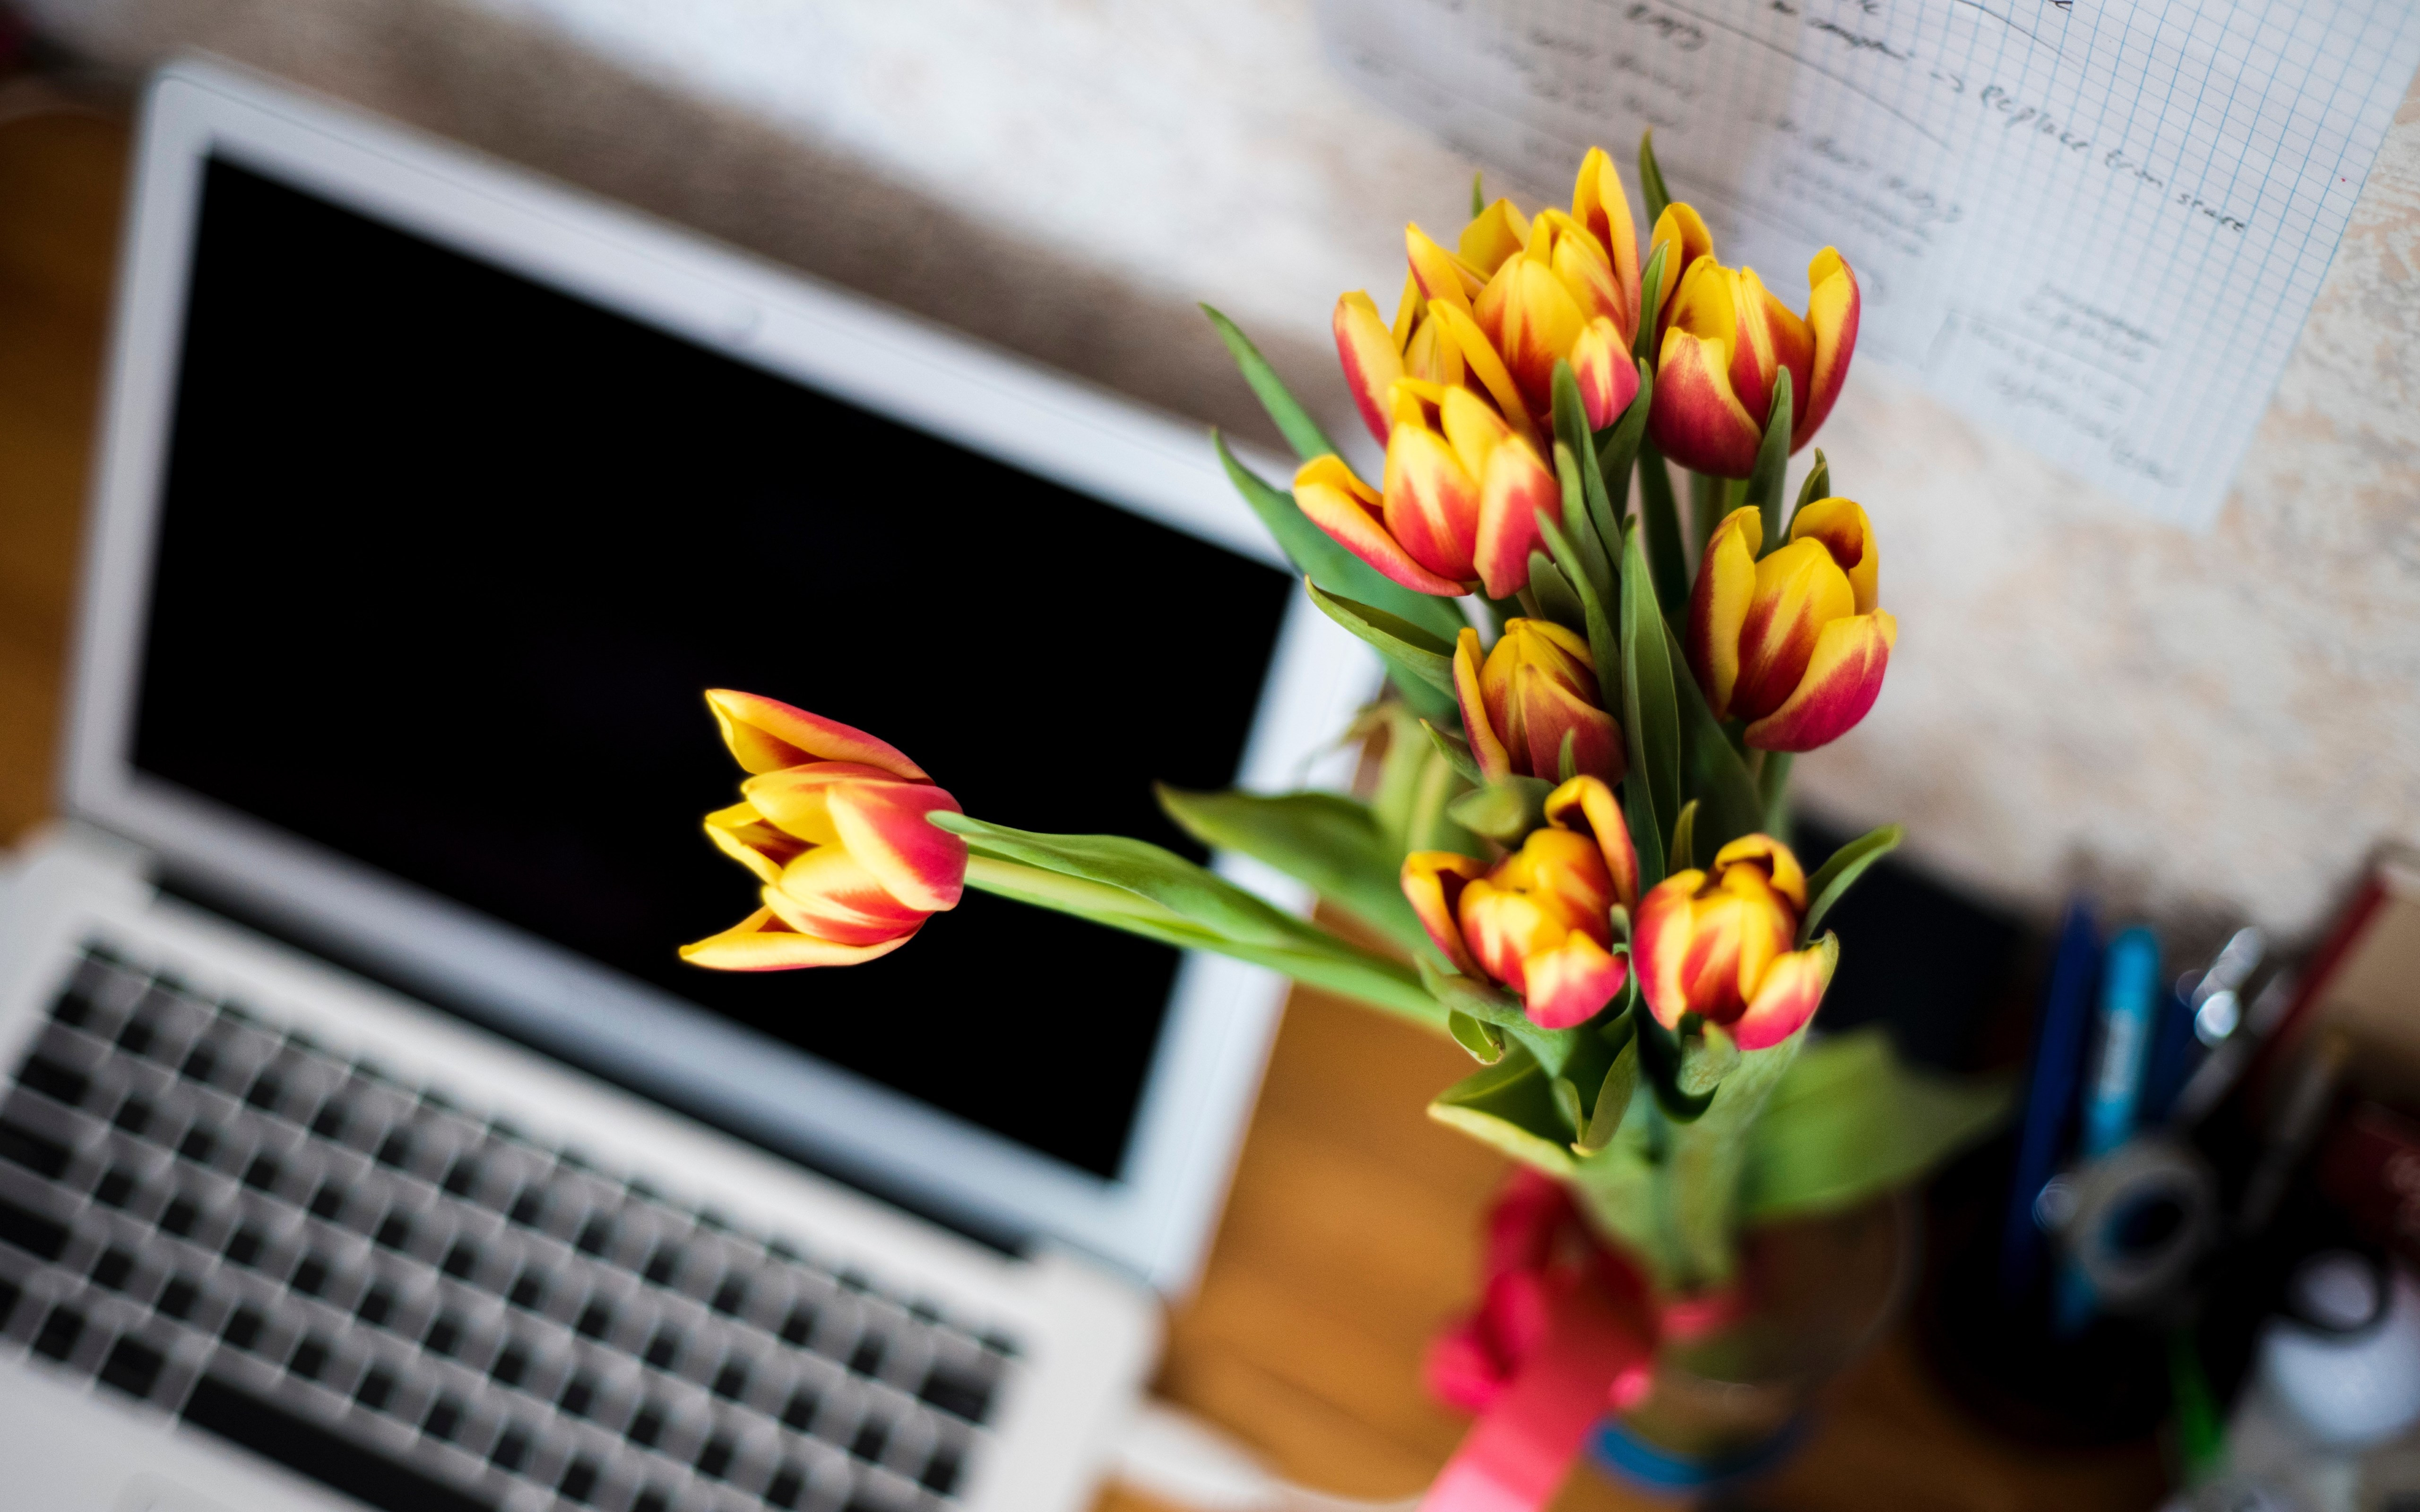 Laptop and tulips bouquet wallpaper 5120x3200